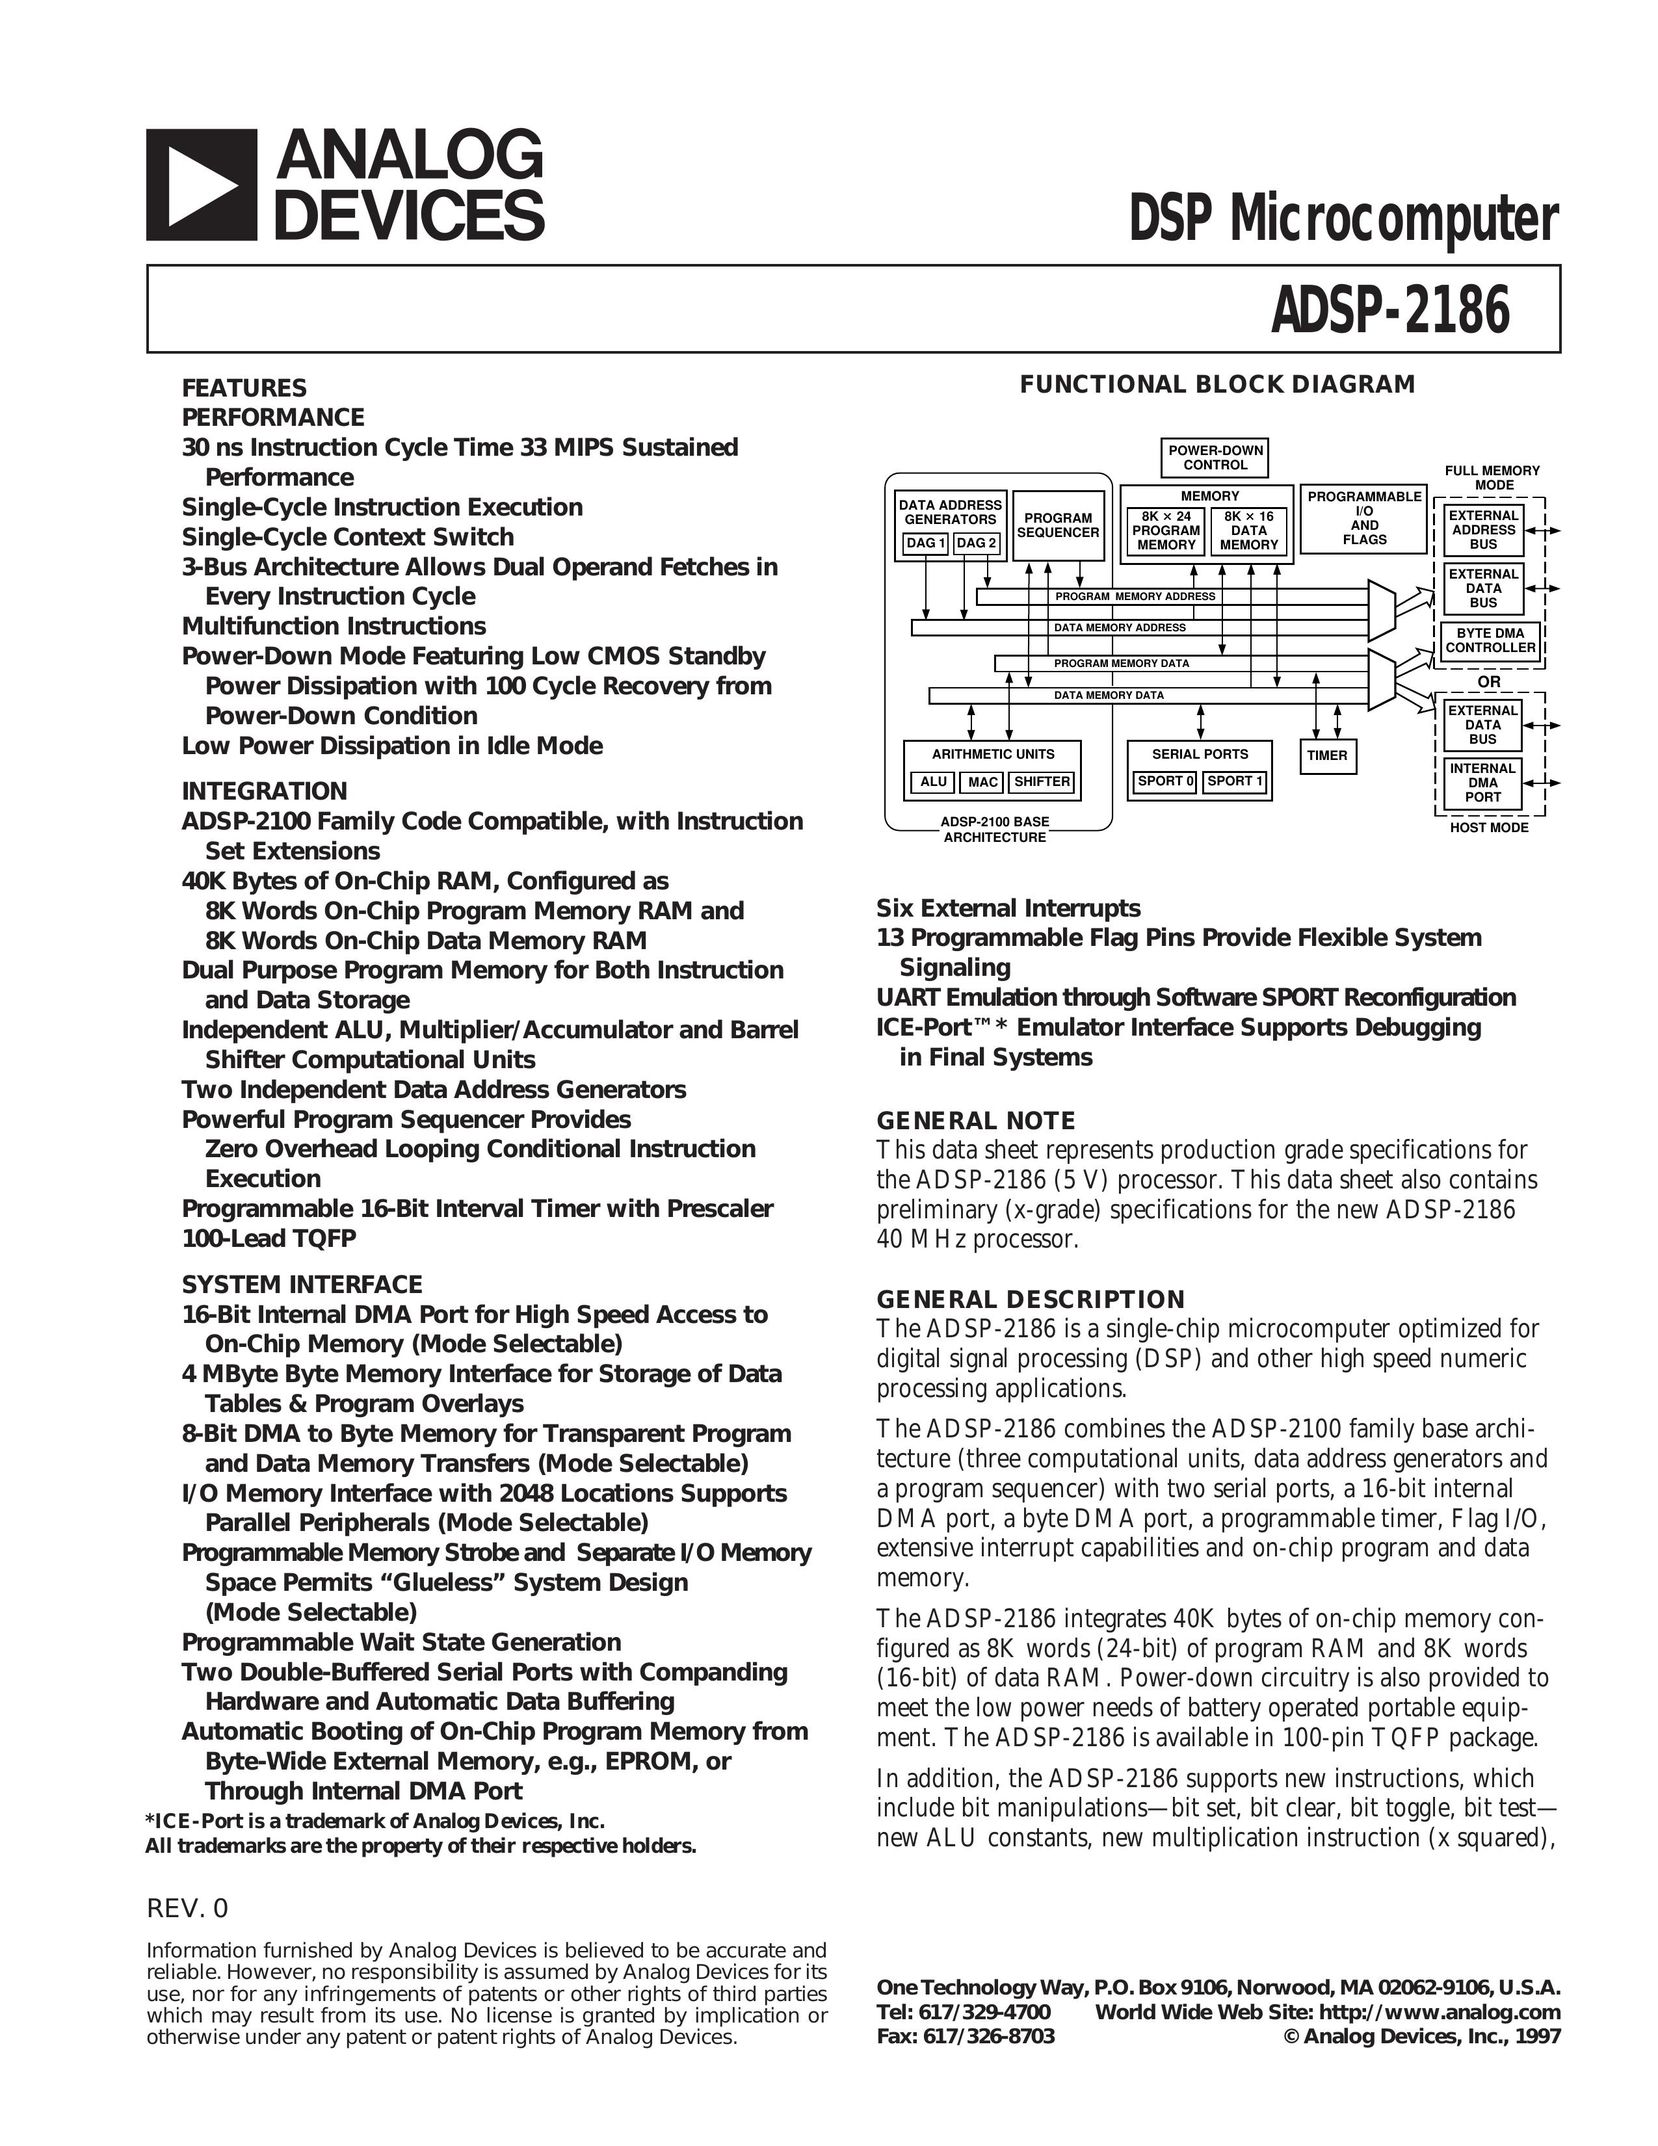 Analog Devices ADSP-2186 Computer Hardware User Manual